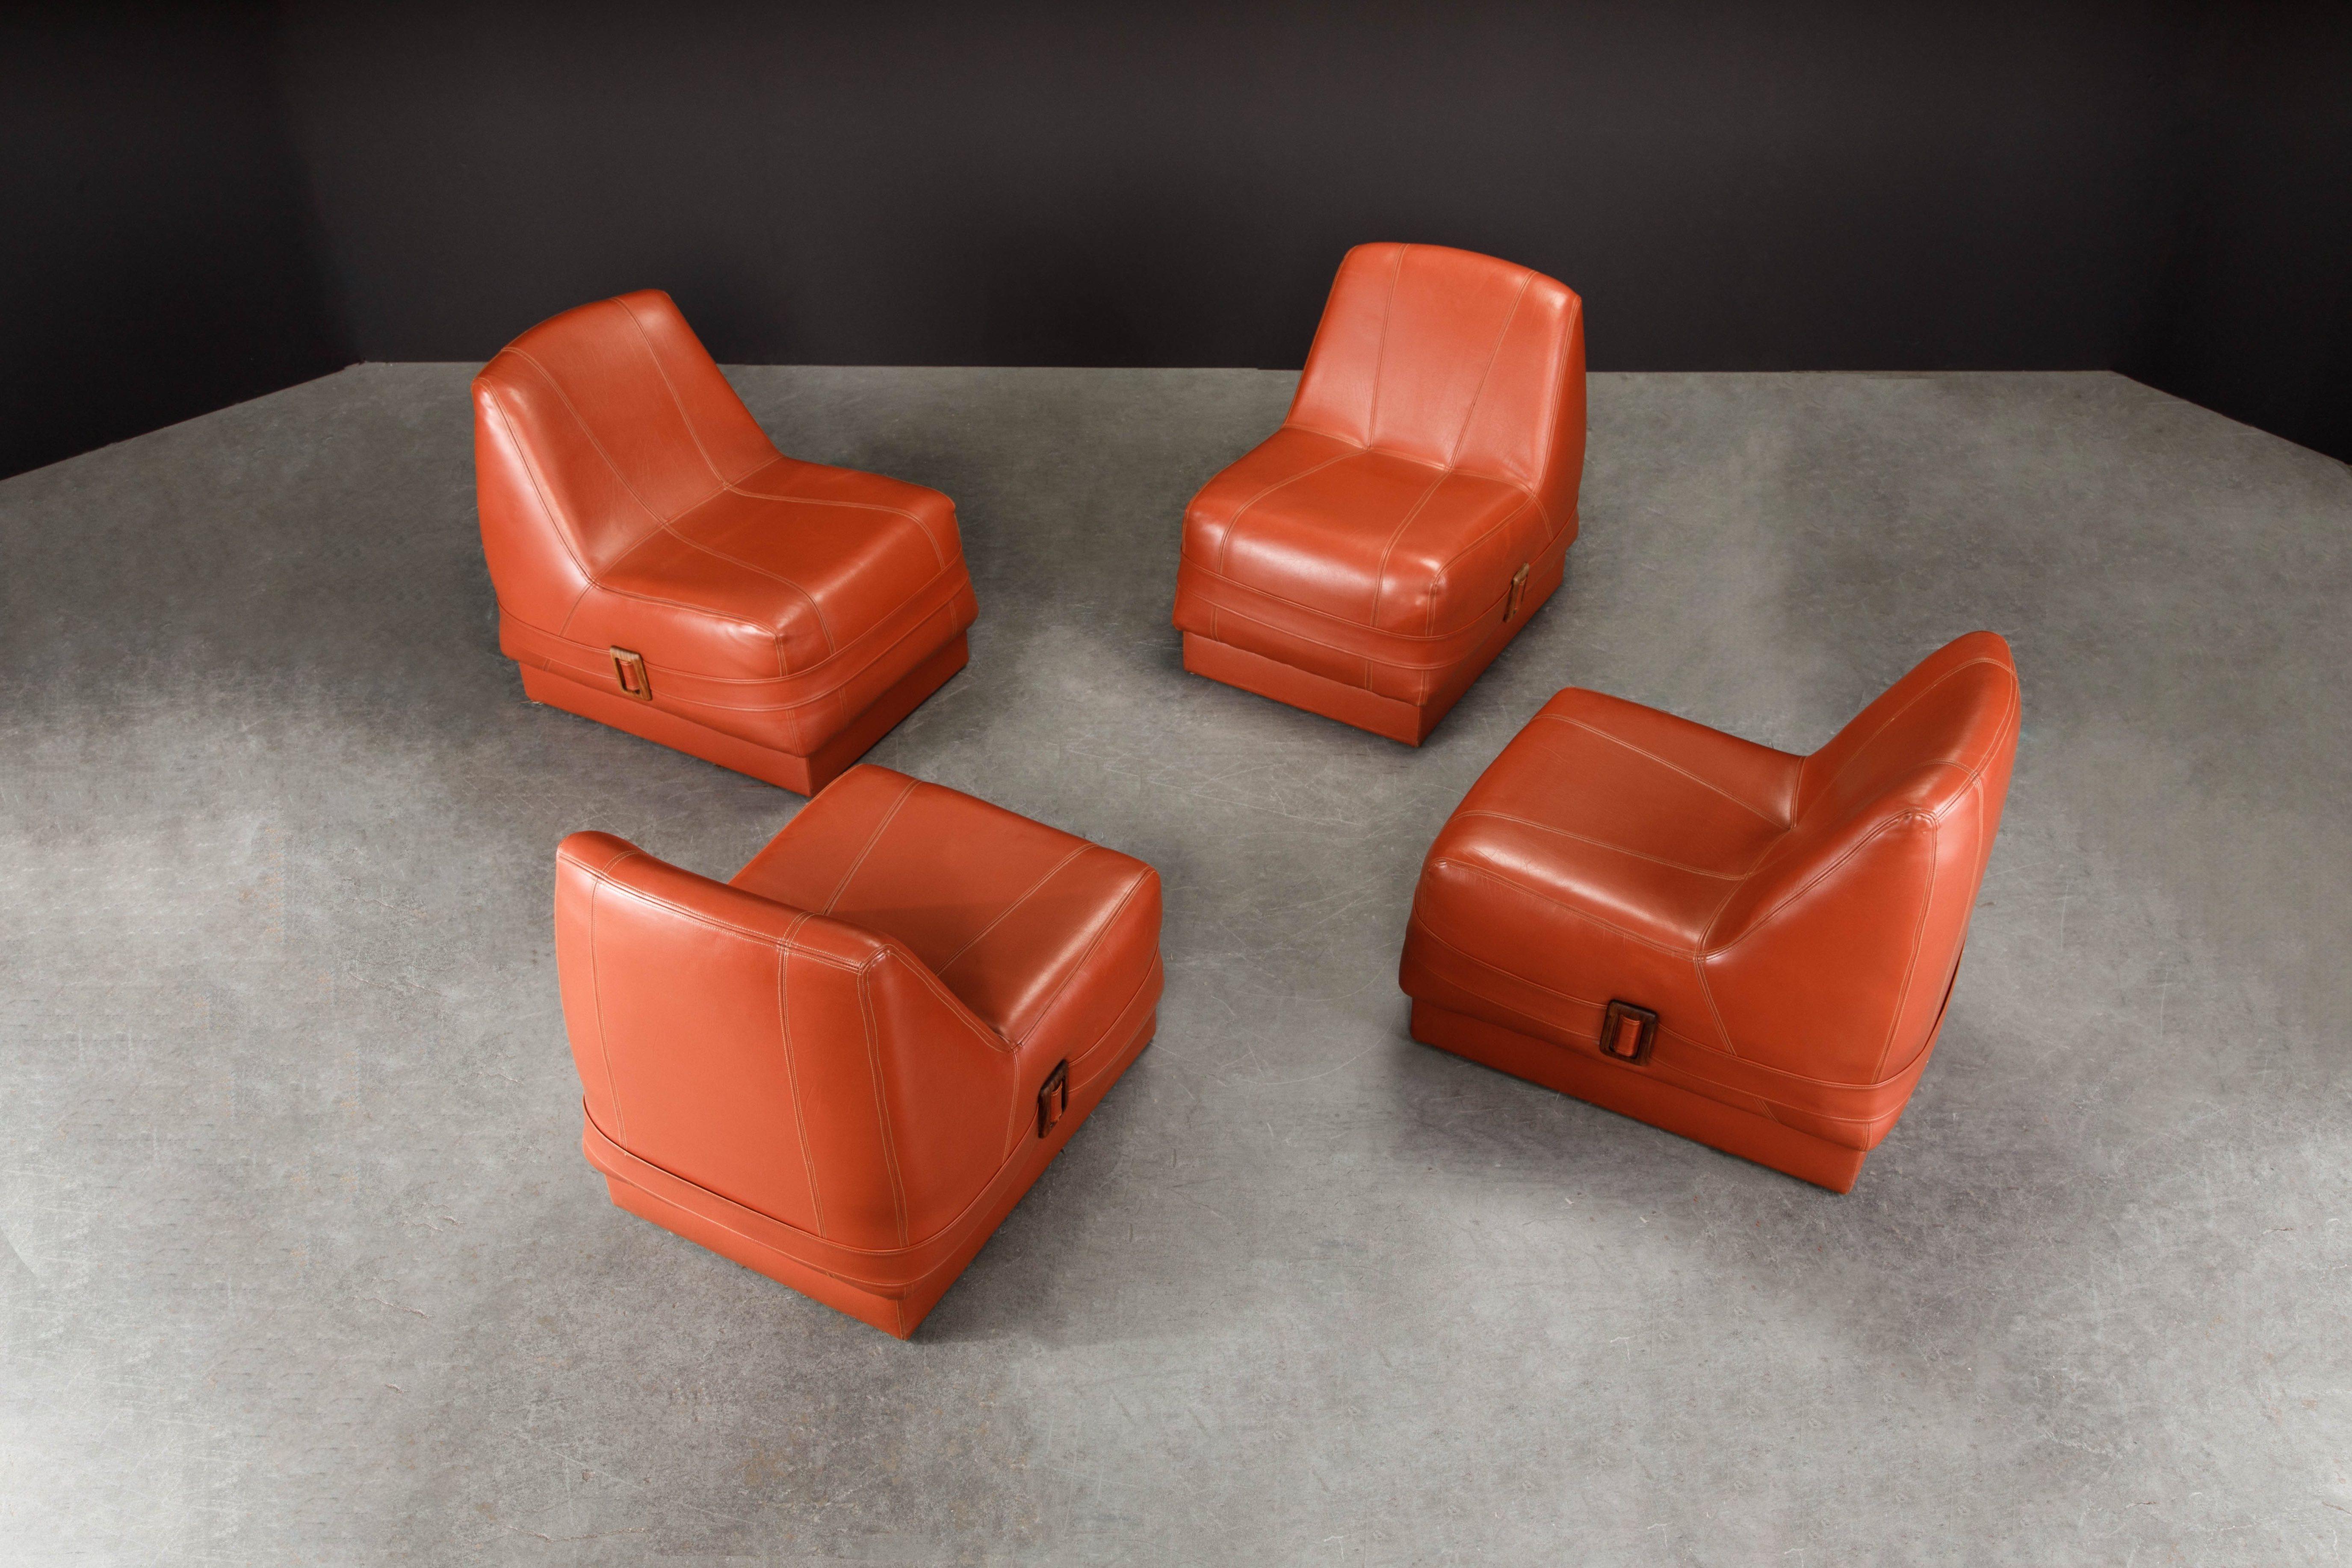 These very rare and documented set of Percival Lafer 'MP-75' lounge chairs, designed and produced in the 1970s. This rare set of four (4) lounge chairs which feature Brazilian Rosewood (Jacaranda) buckles were acquired by us in a home in Rio de